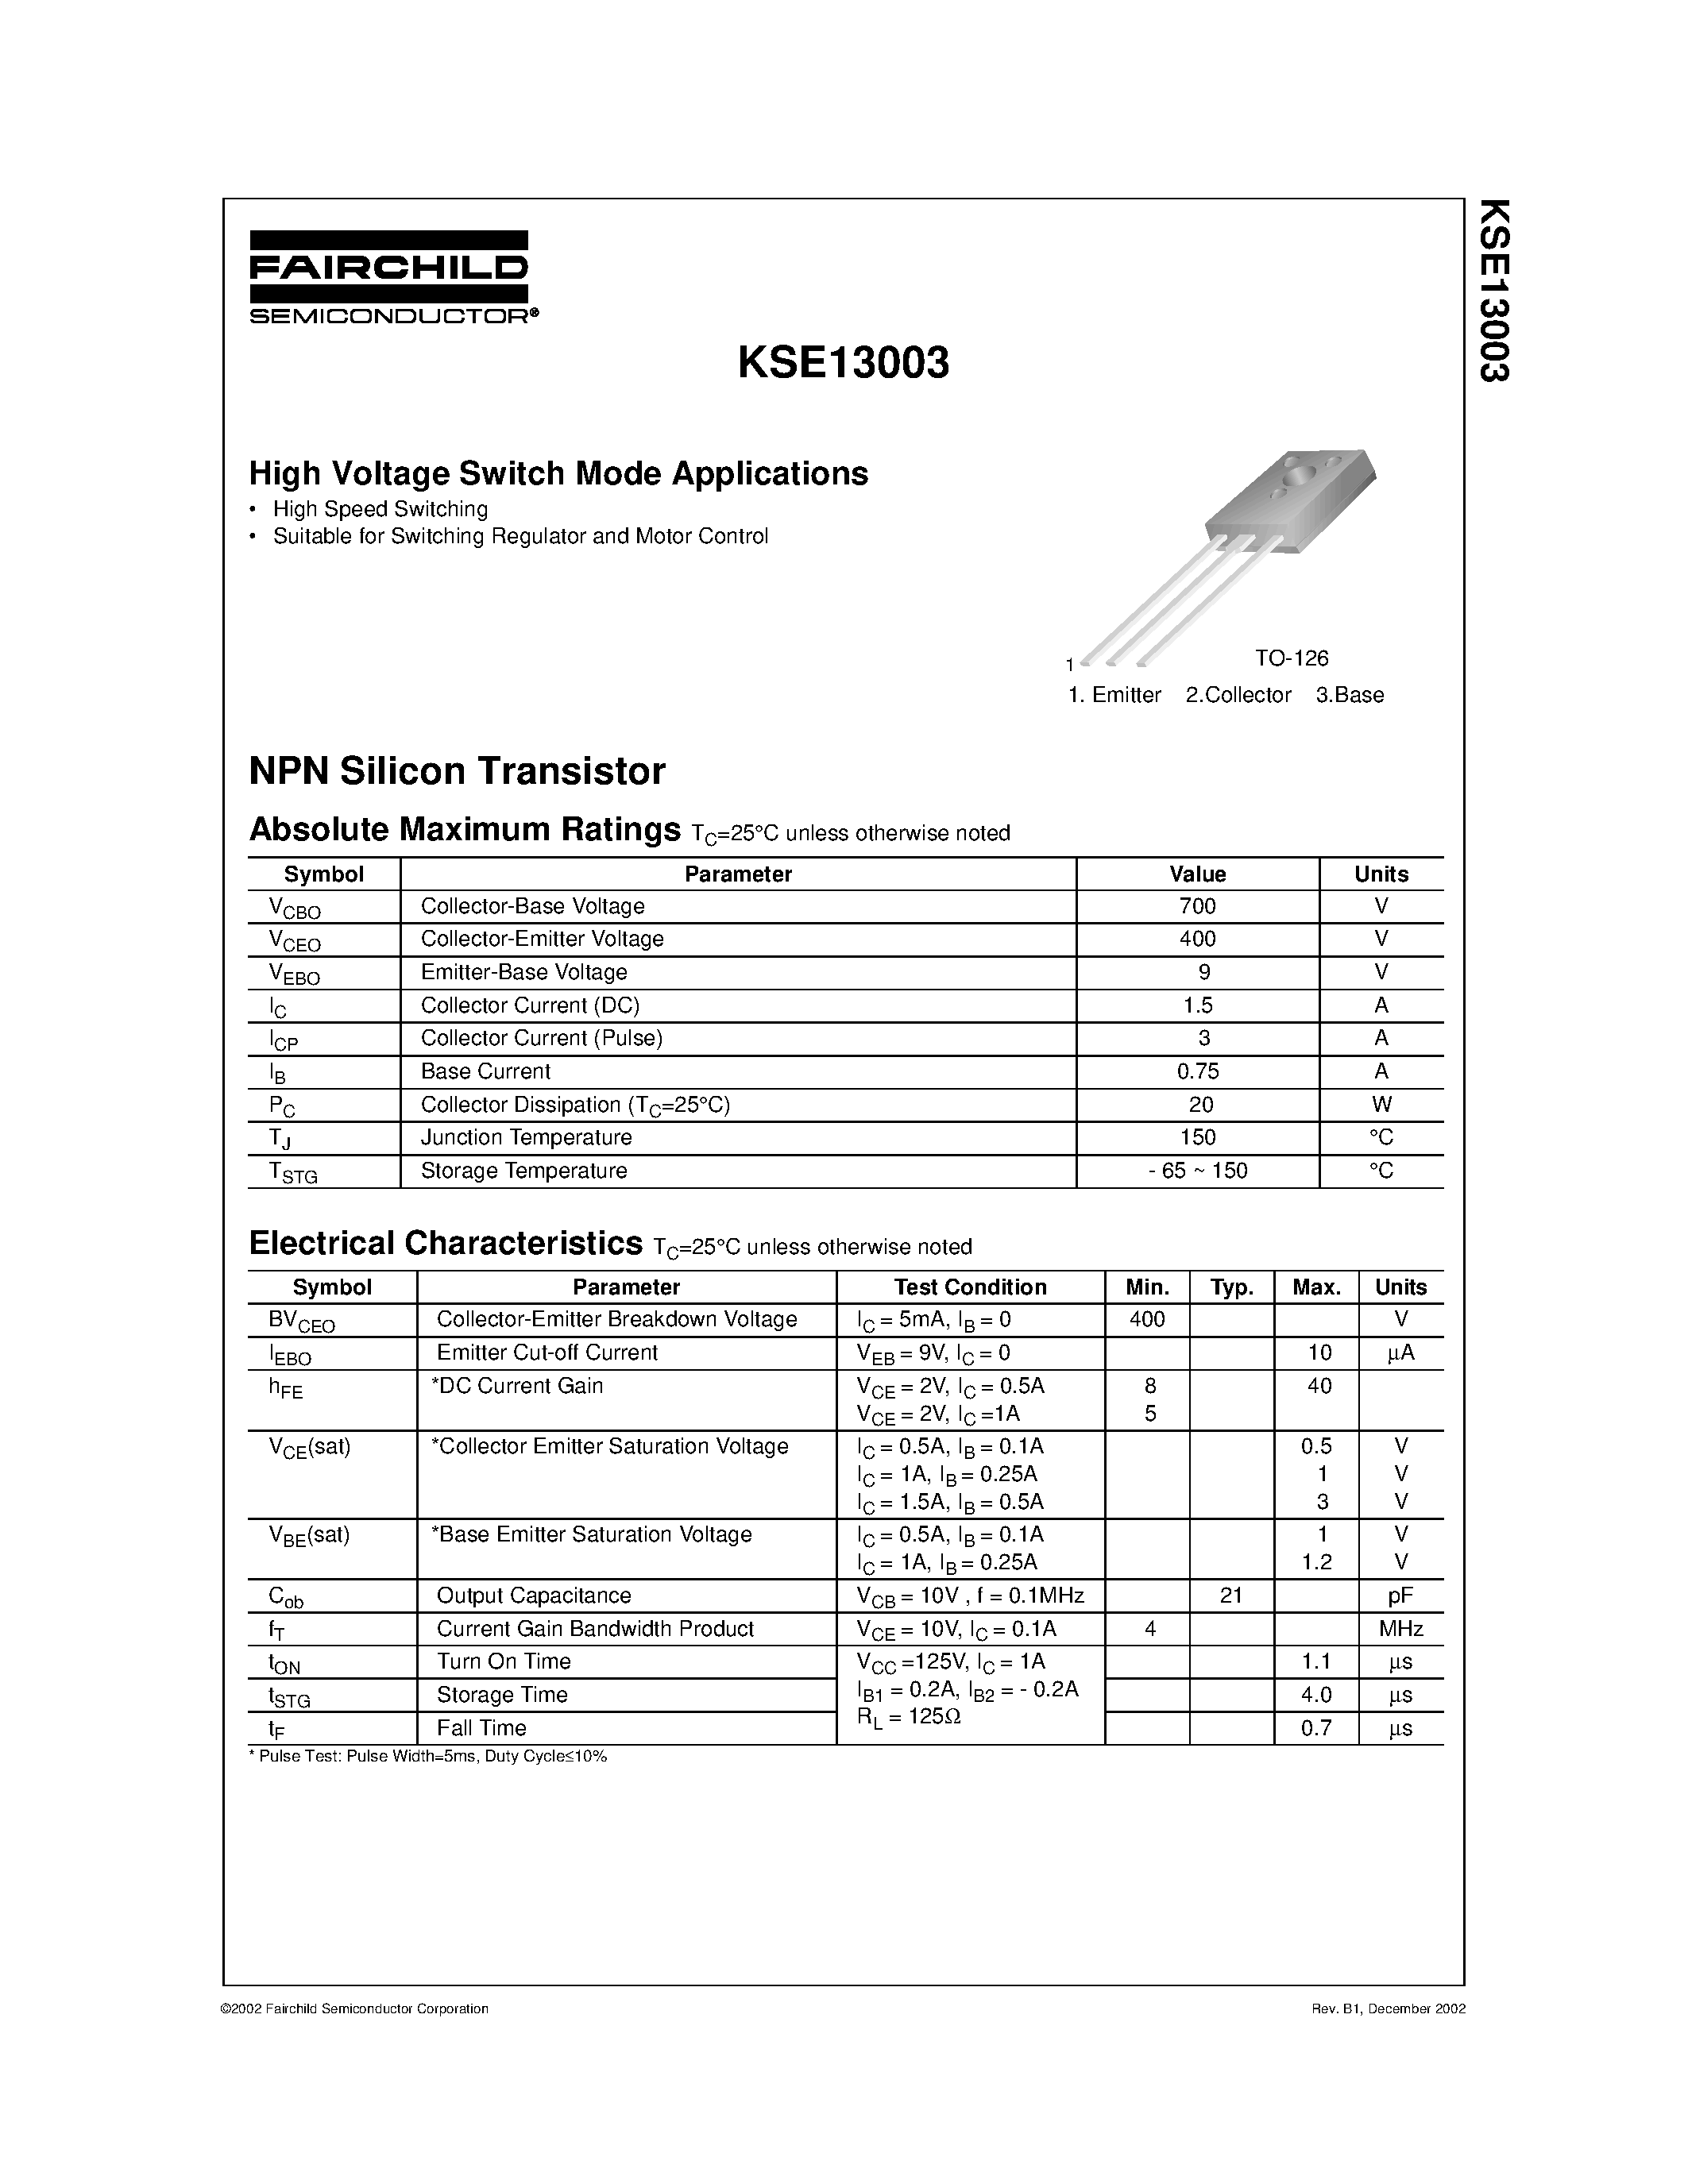 Datasheet KSE13003 - High Voltage Switch Mode Applications page 1